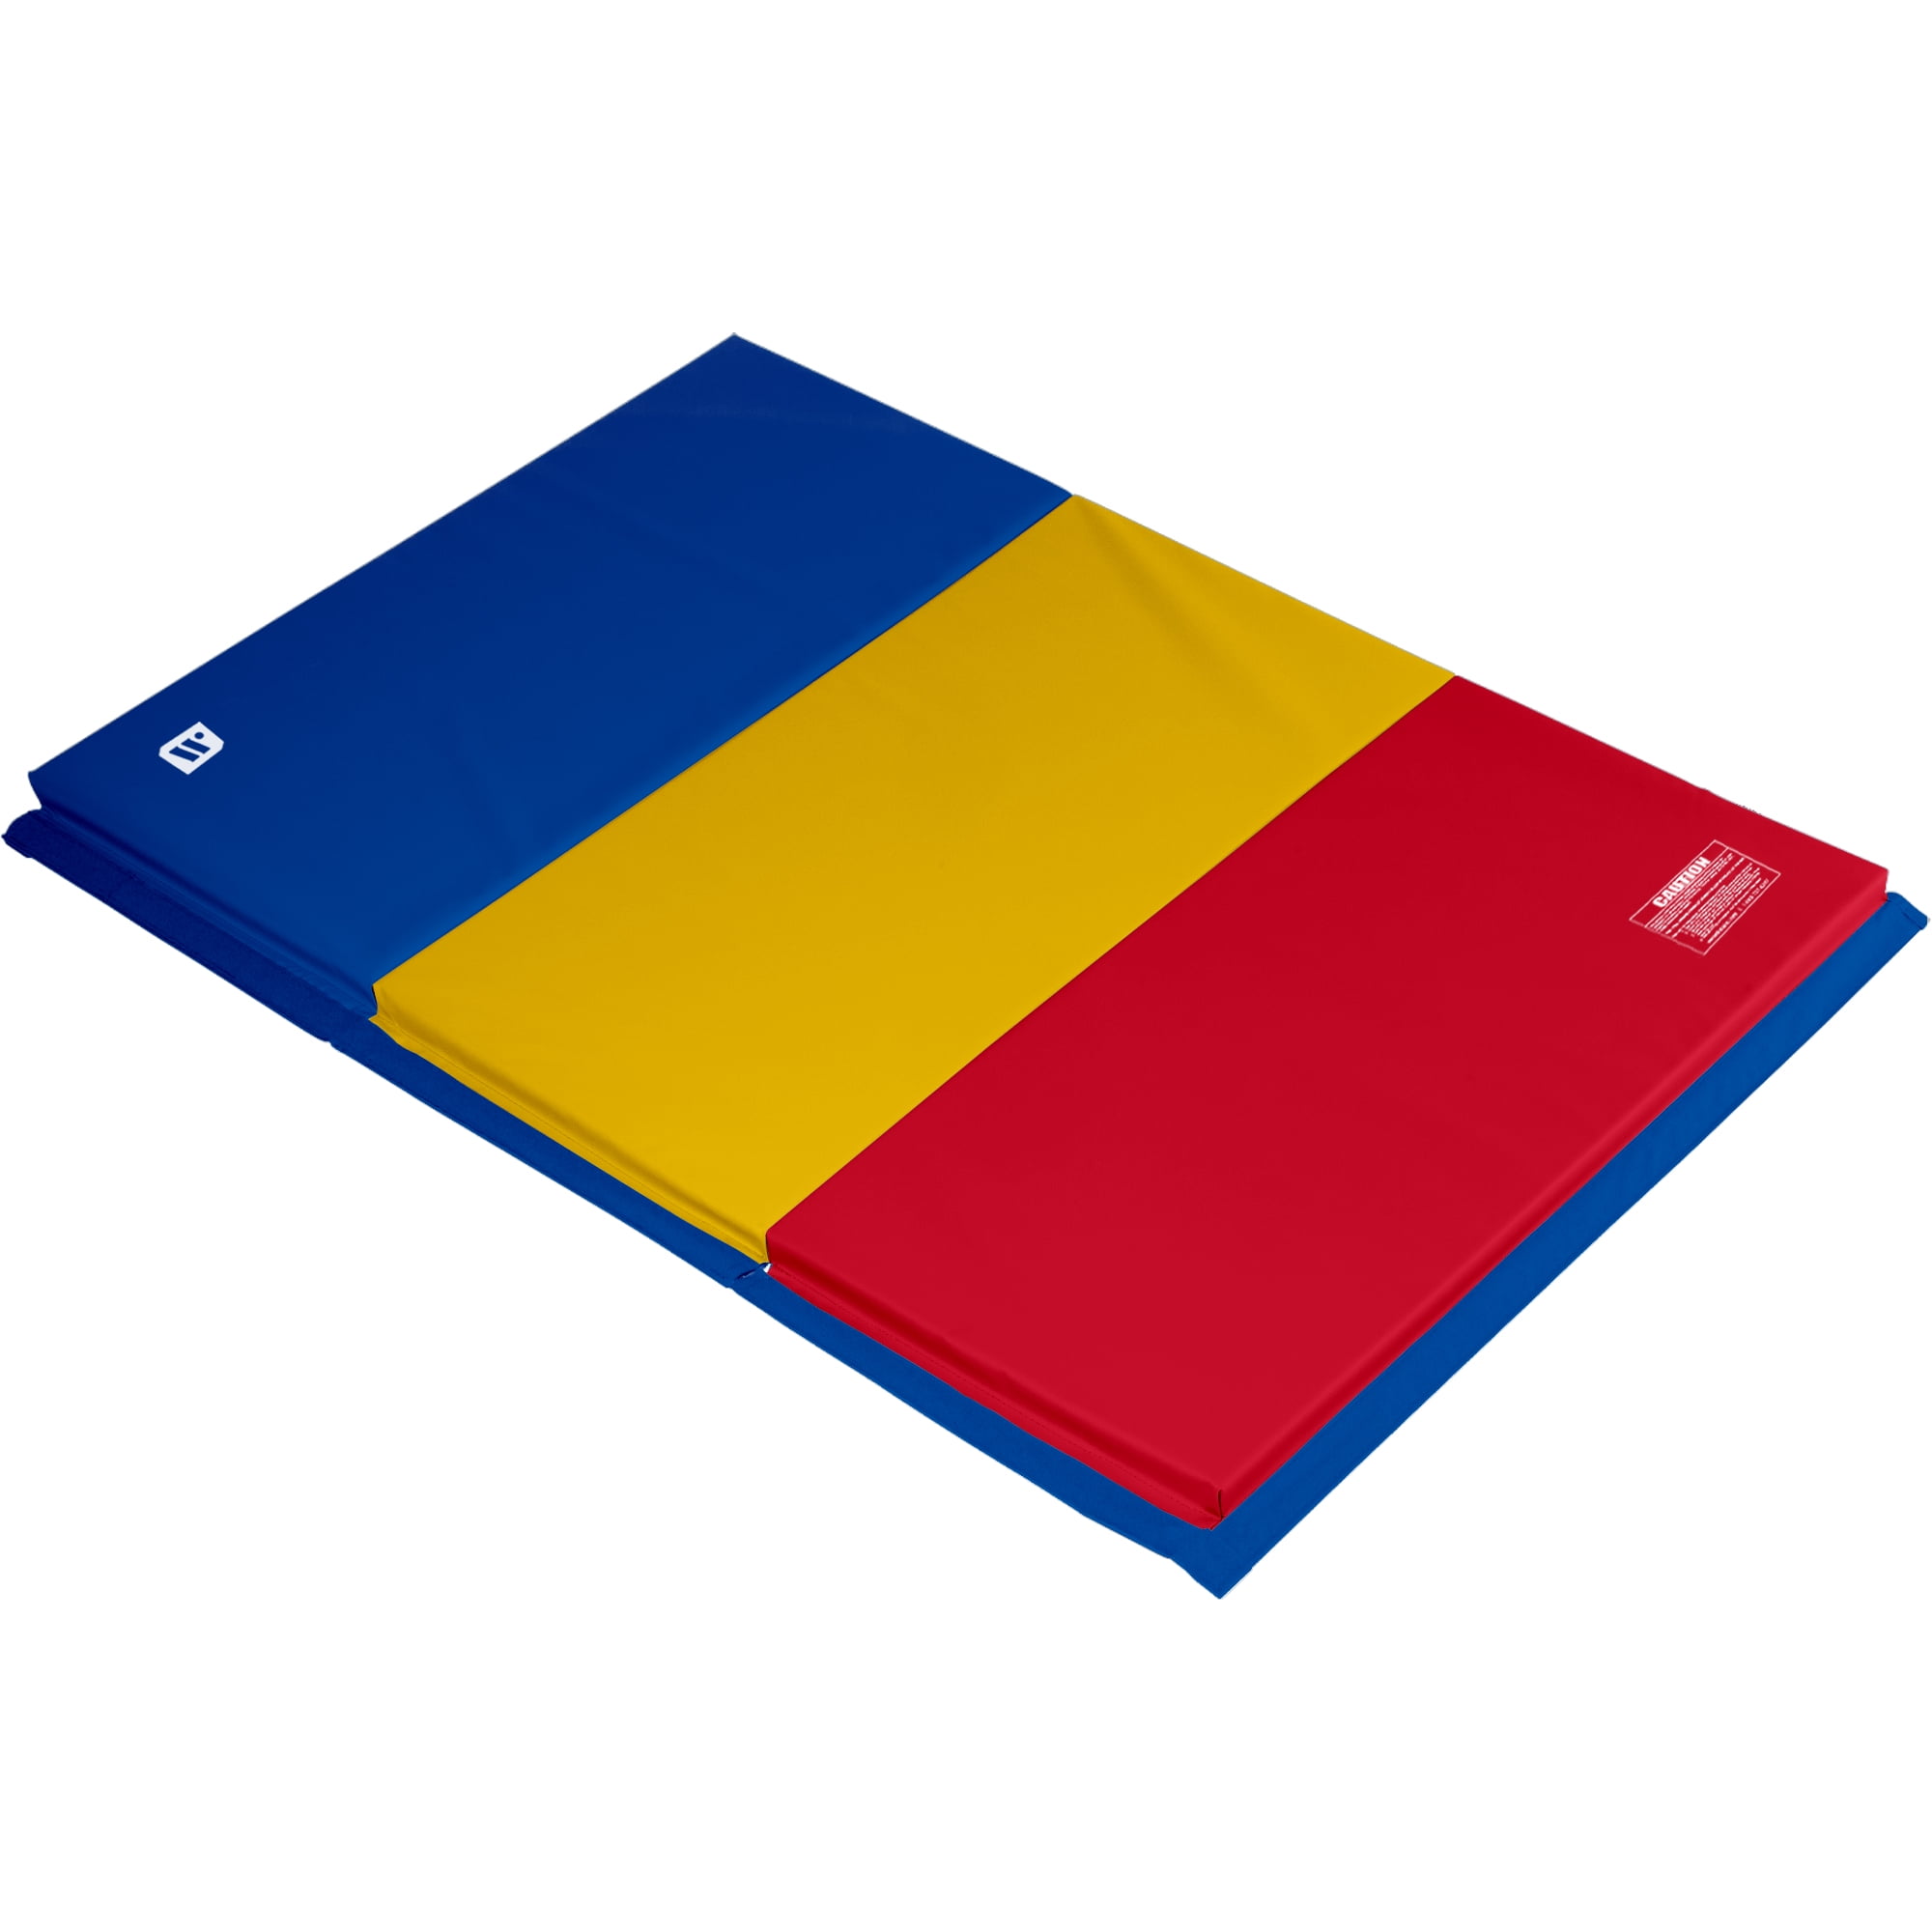 We Sell Mats 2-Inch Thick Gymnastics Tumbling Exercise Folding Martial Arts Mats with Hook and Loop Fasteners on 4 Side Crosslink PE Foam Core 